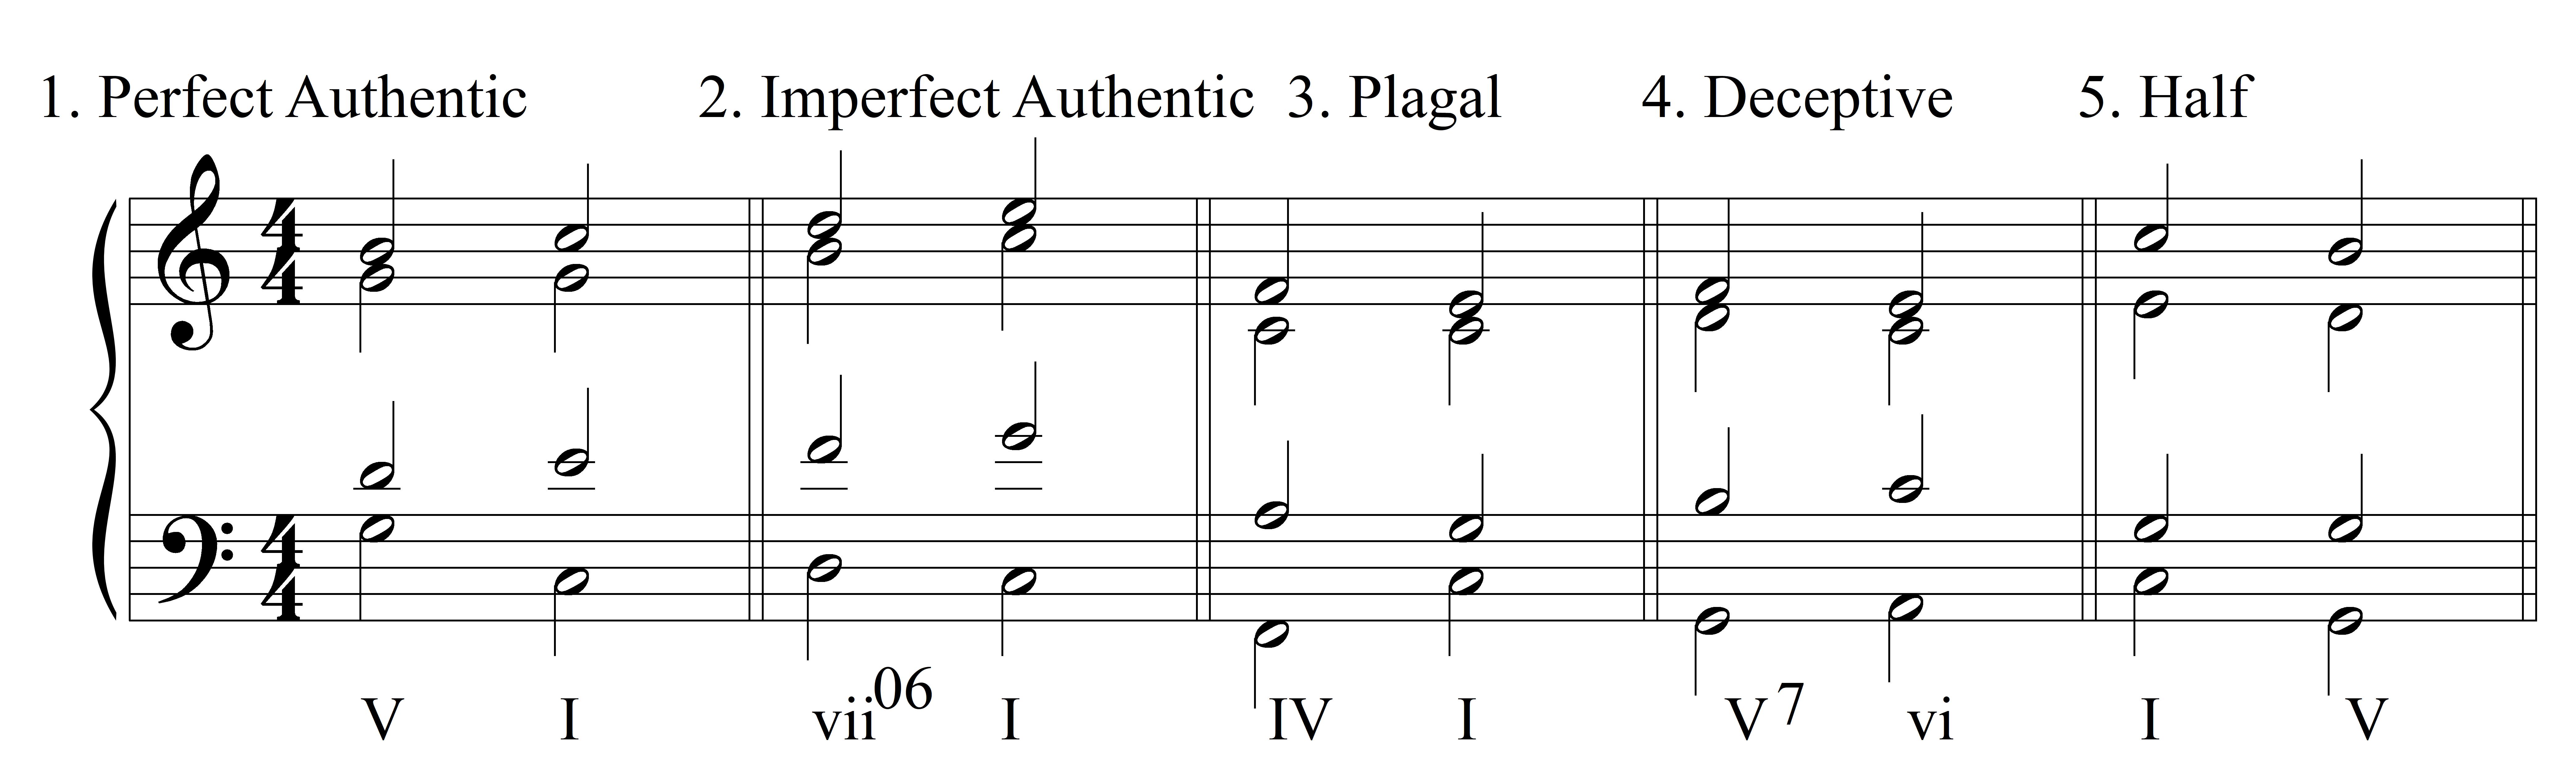 Cadences Music Theory Examples Cadences The 4 Types Explained Perfect Plagal Imperfect